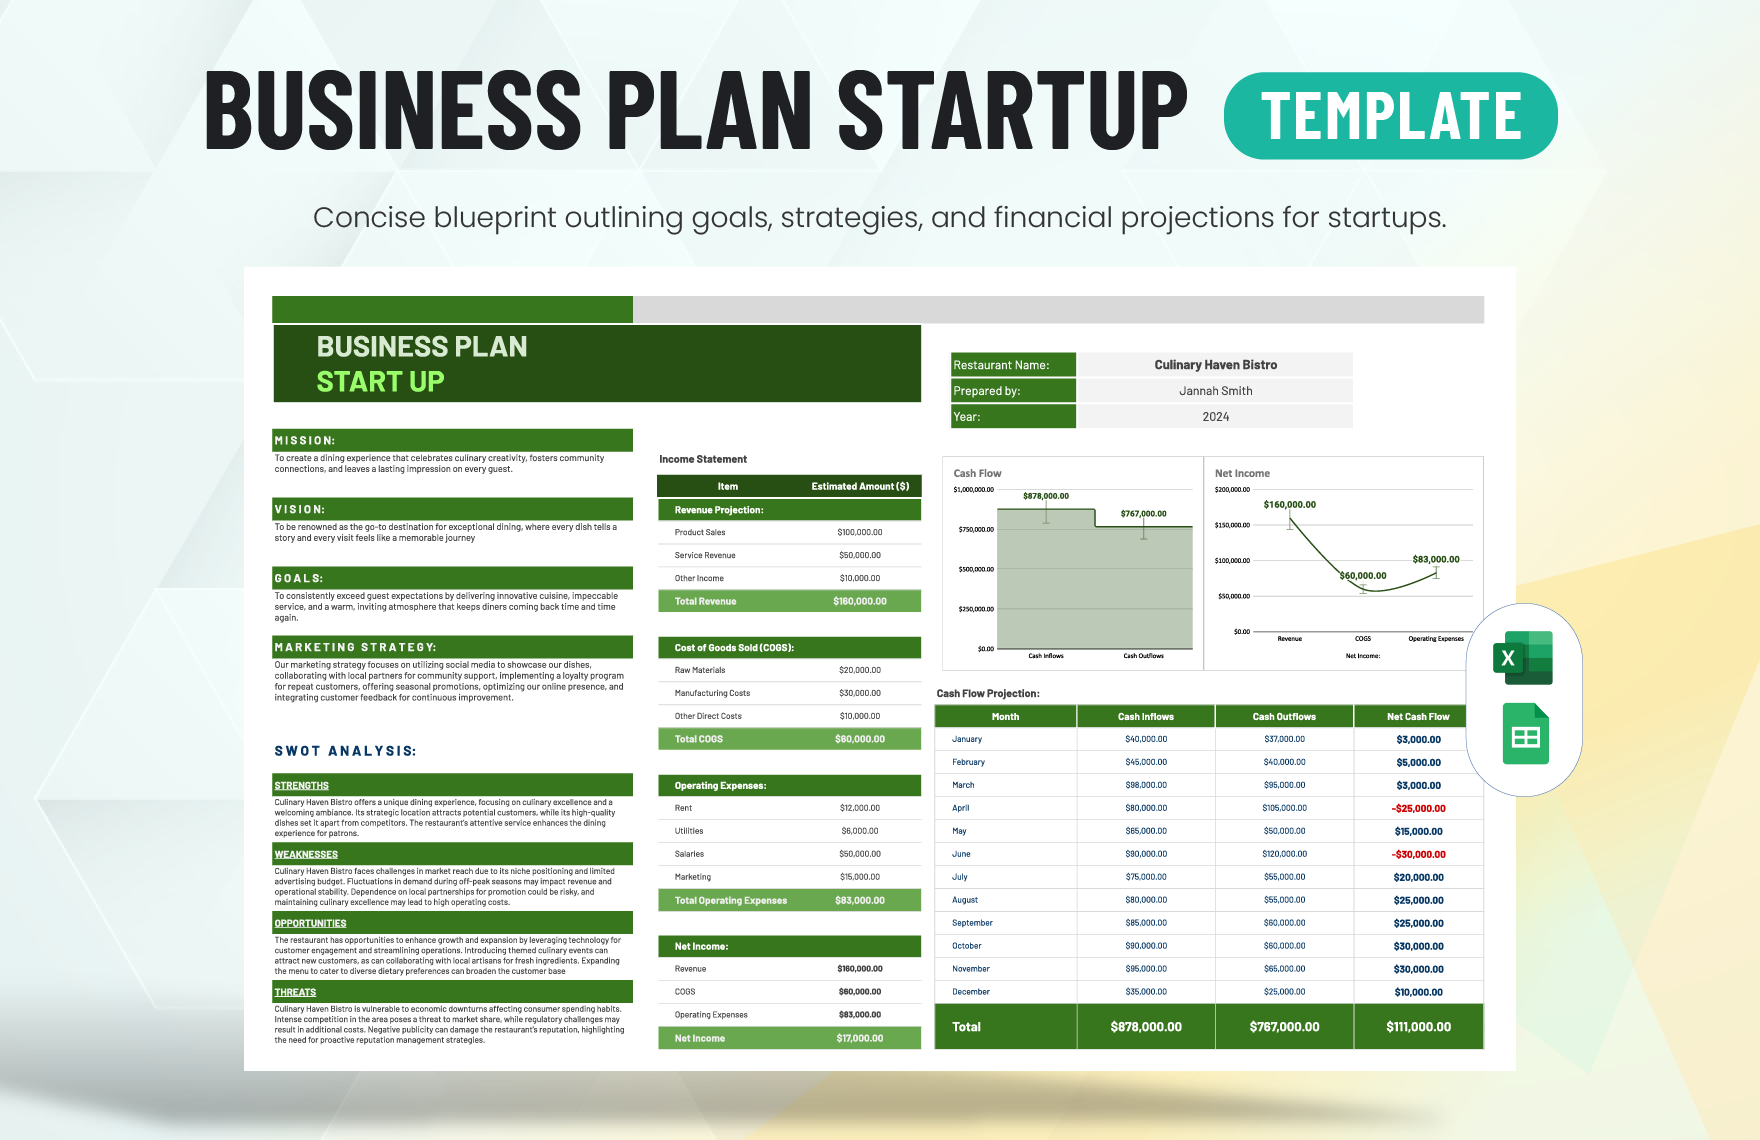 Business Plan Startup Template in Excel, Google Sheets